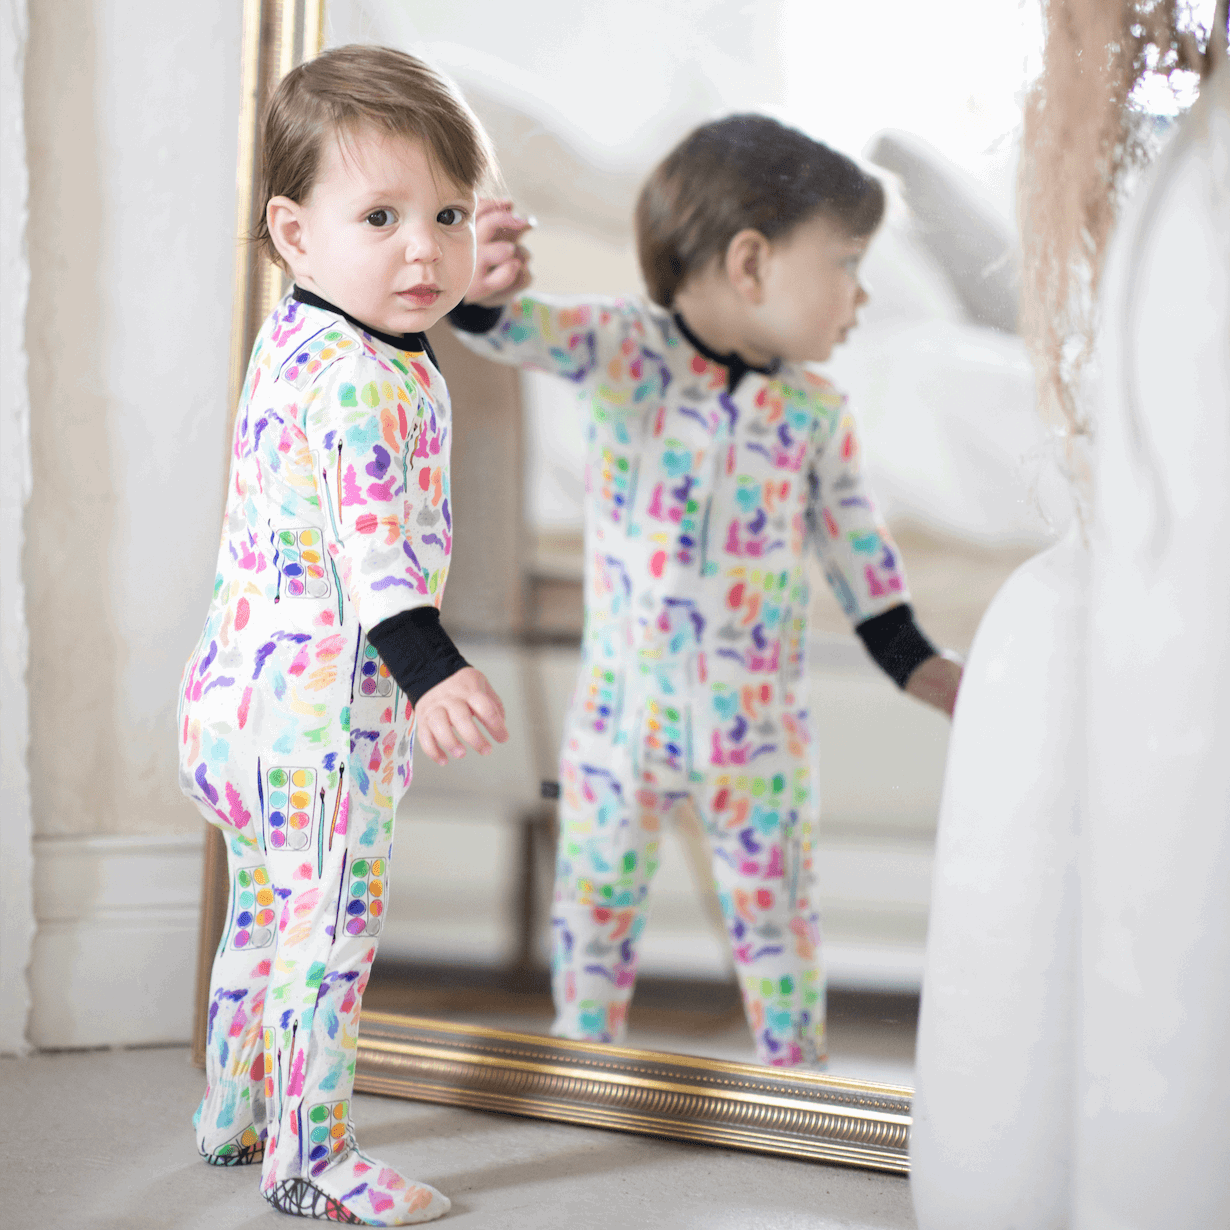 Peregrine Kidswear Watercolors Fitted One Piece Footed Pajamas in White